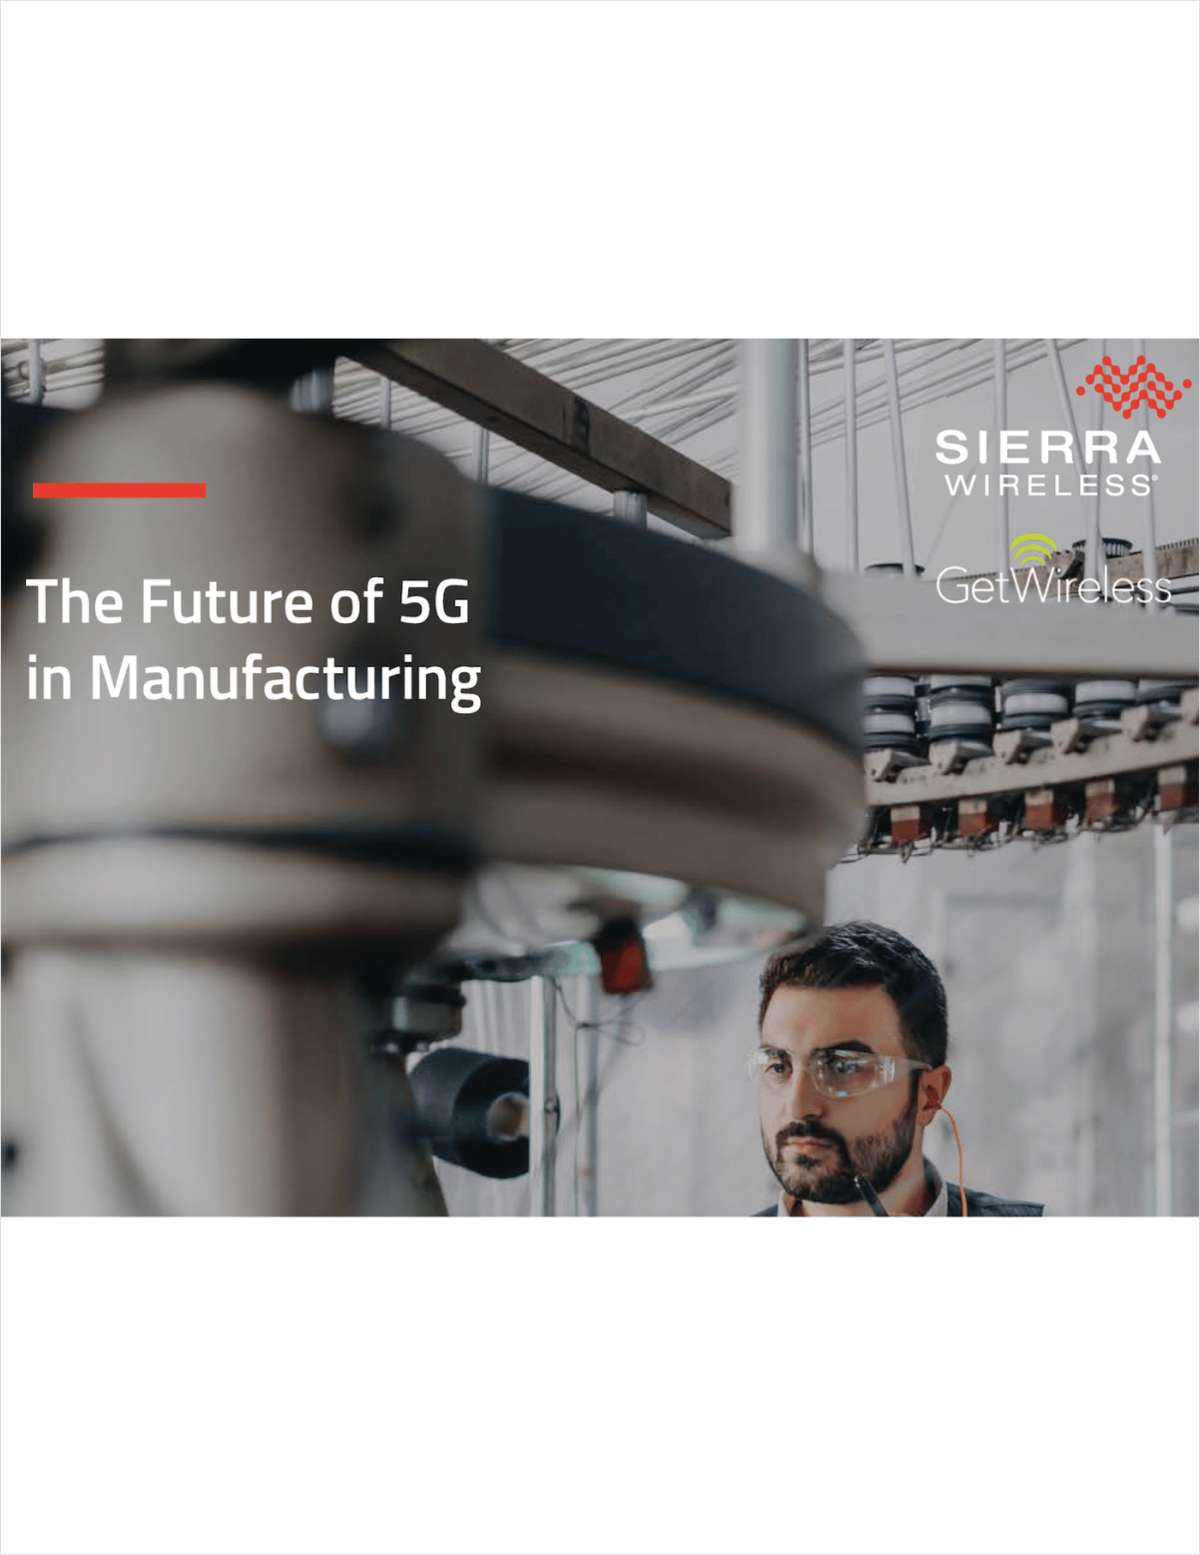 The Future of 5G in Manufacturing